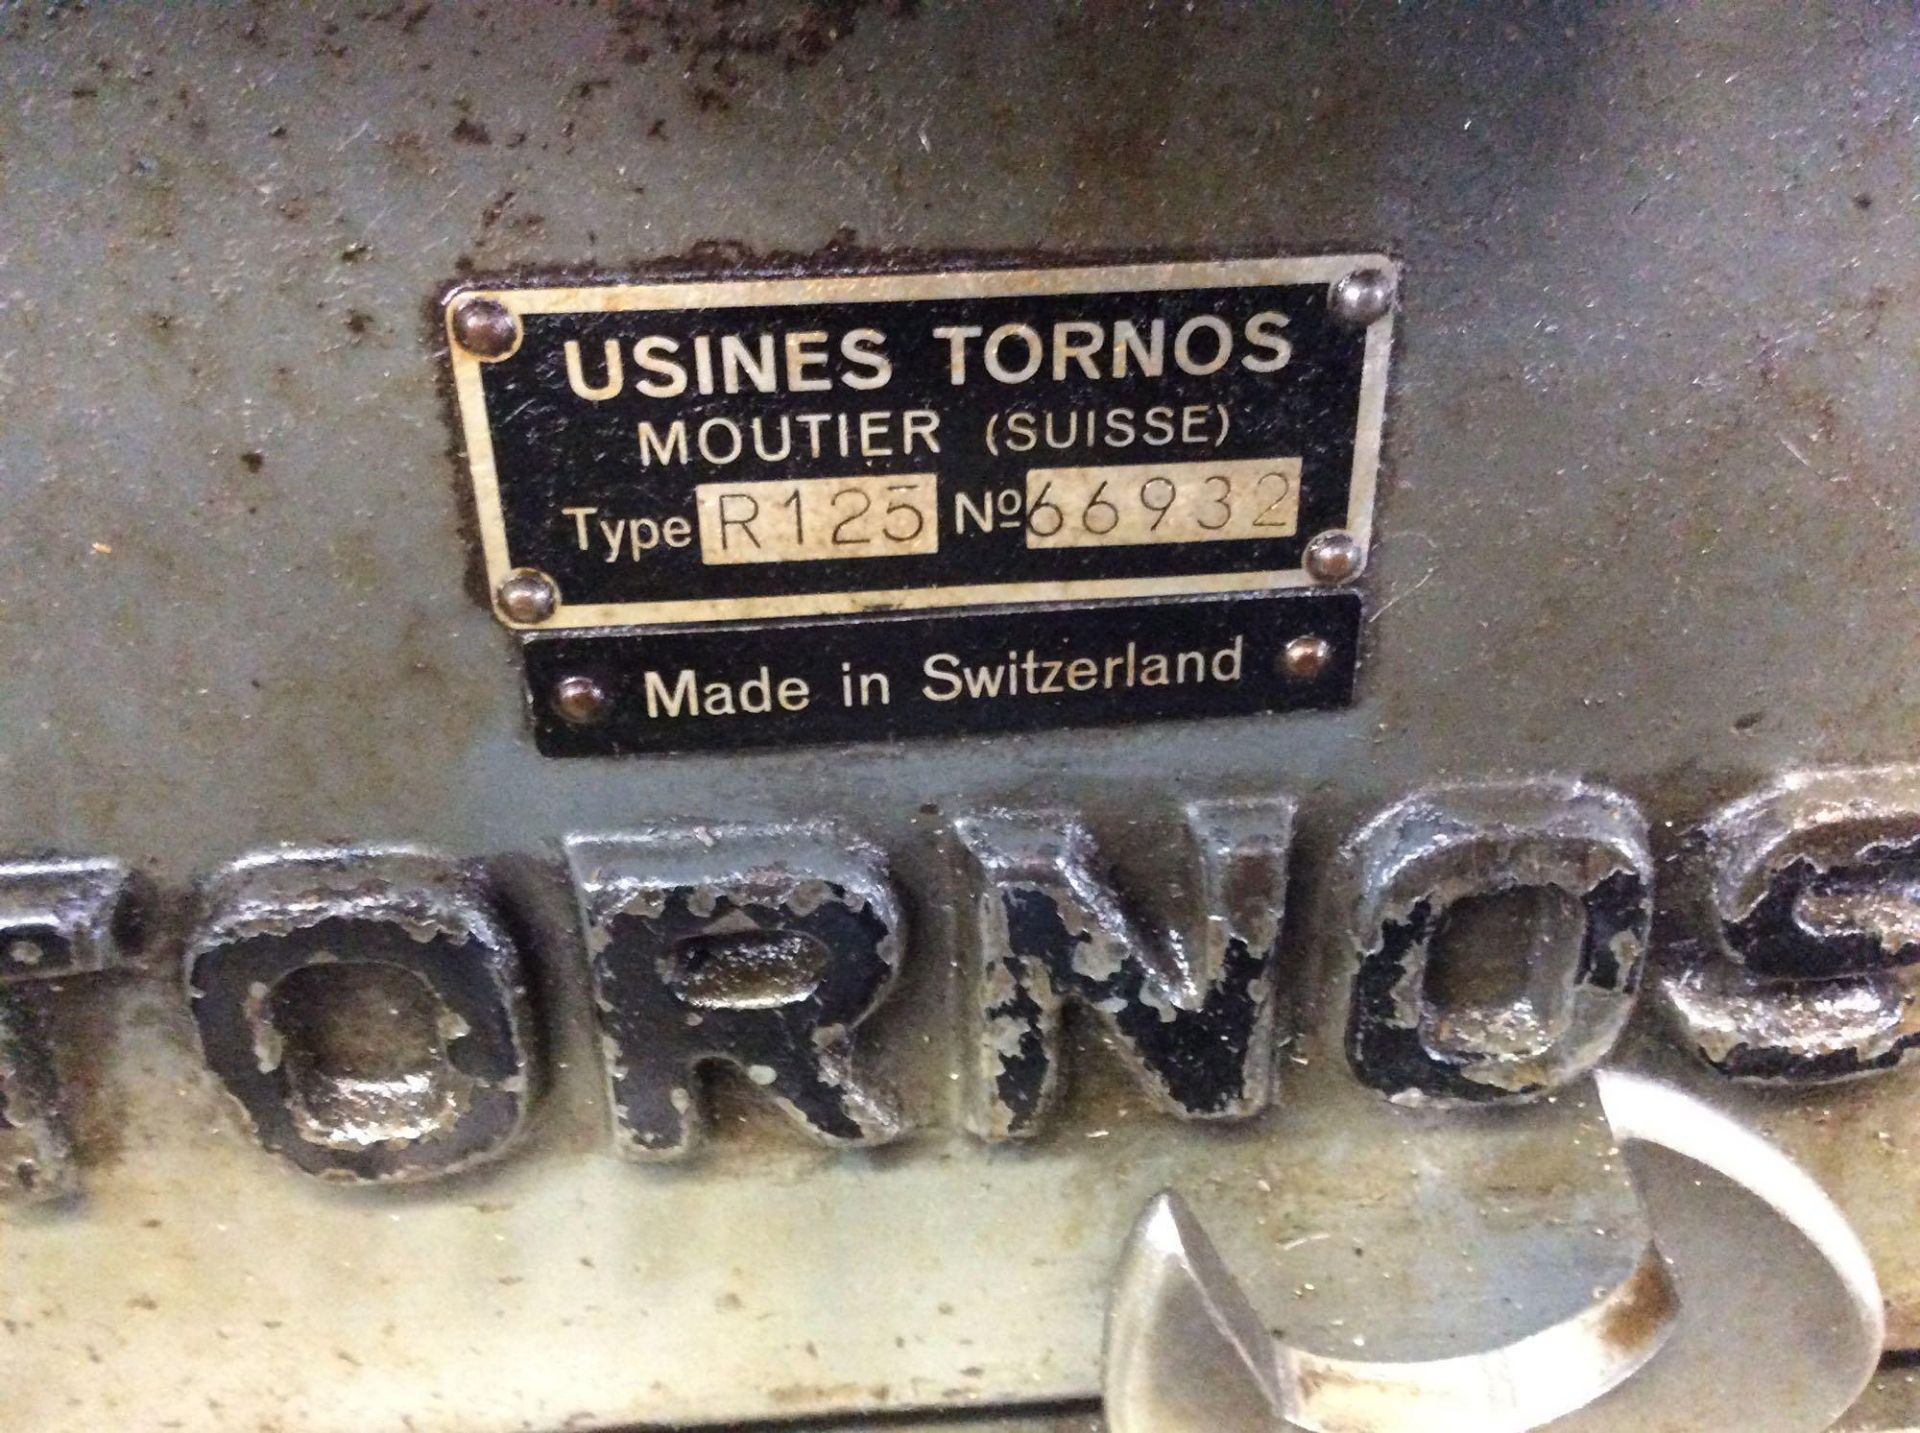 Tornos Moutier Suisse automatic screw machine, mn R125, sn 66932, spindle stop, XIII-Y sn 4059 and X - Image 7 of 7